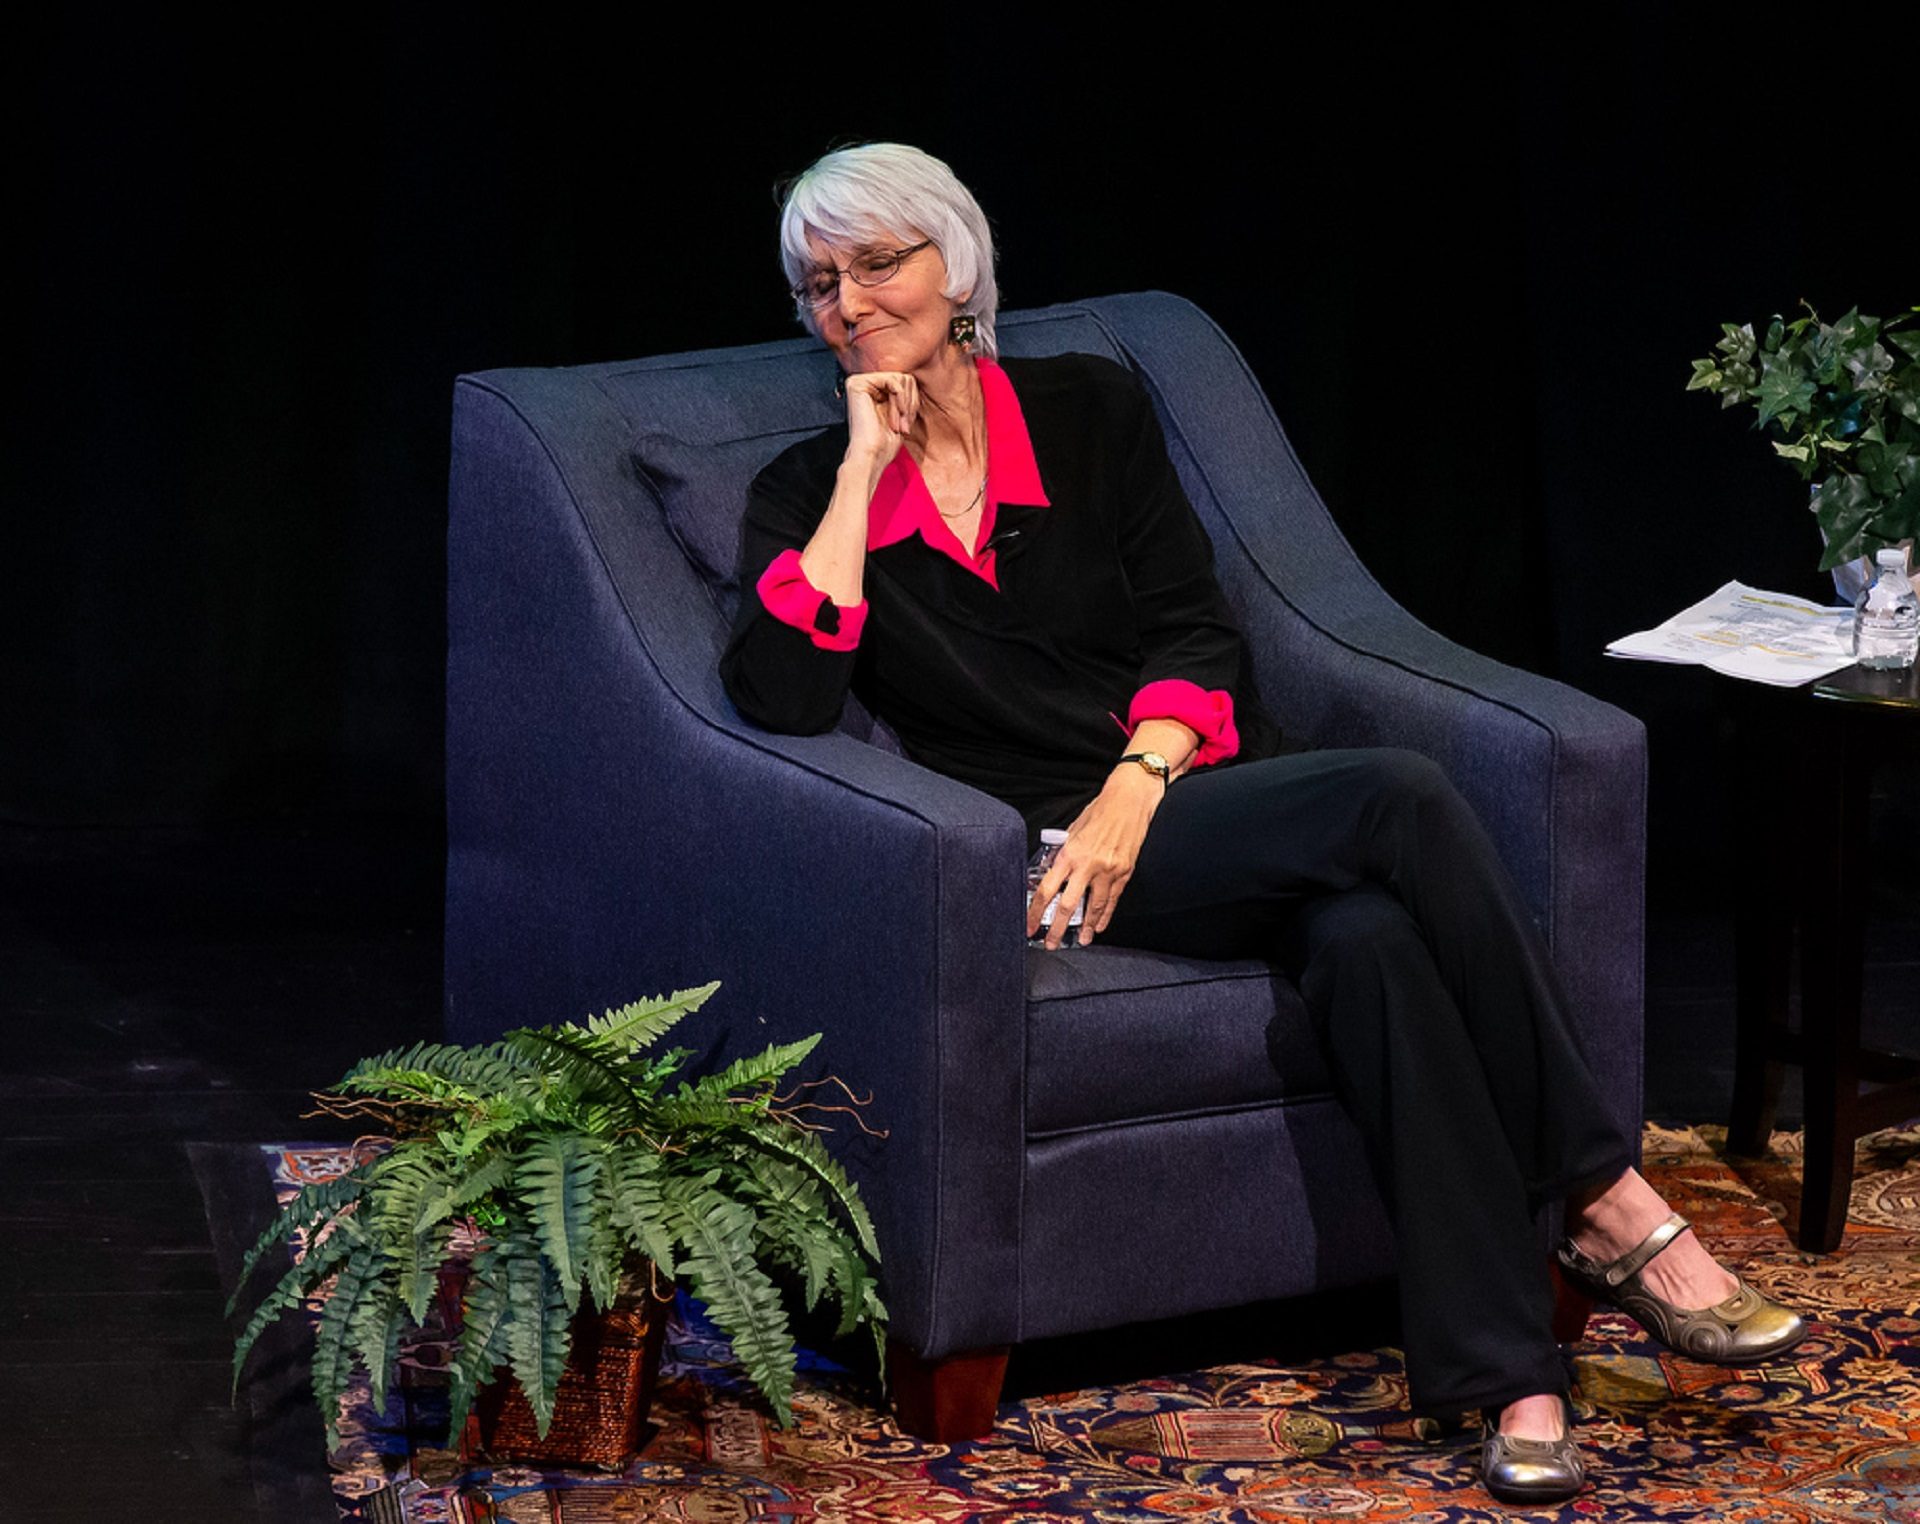 Sue Klebold, an advocate of mental health awareness and mother of one of the Columbine High School shooters, speaks at Penn State Harrisburg on September 16, 2019.